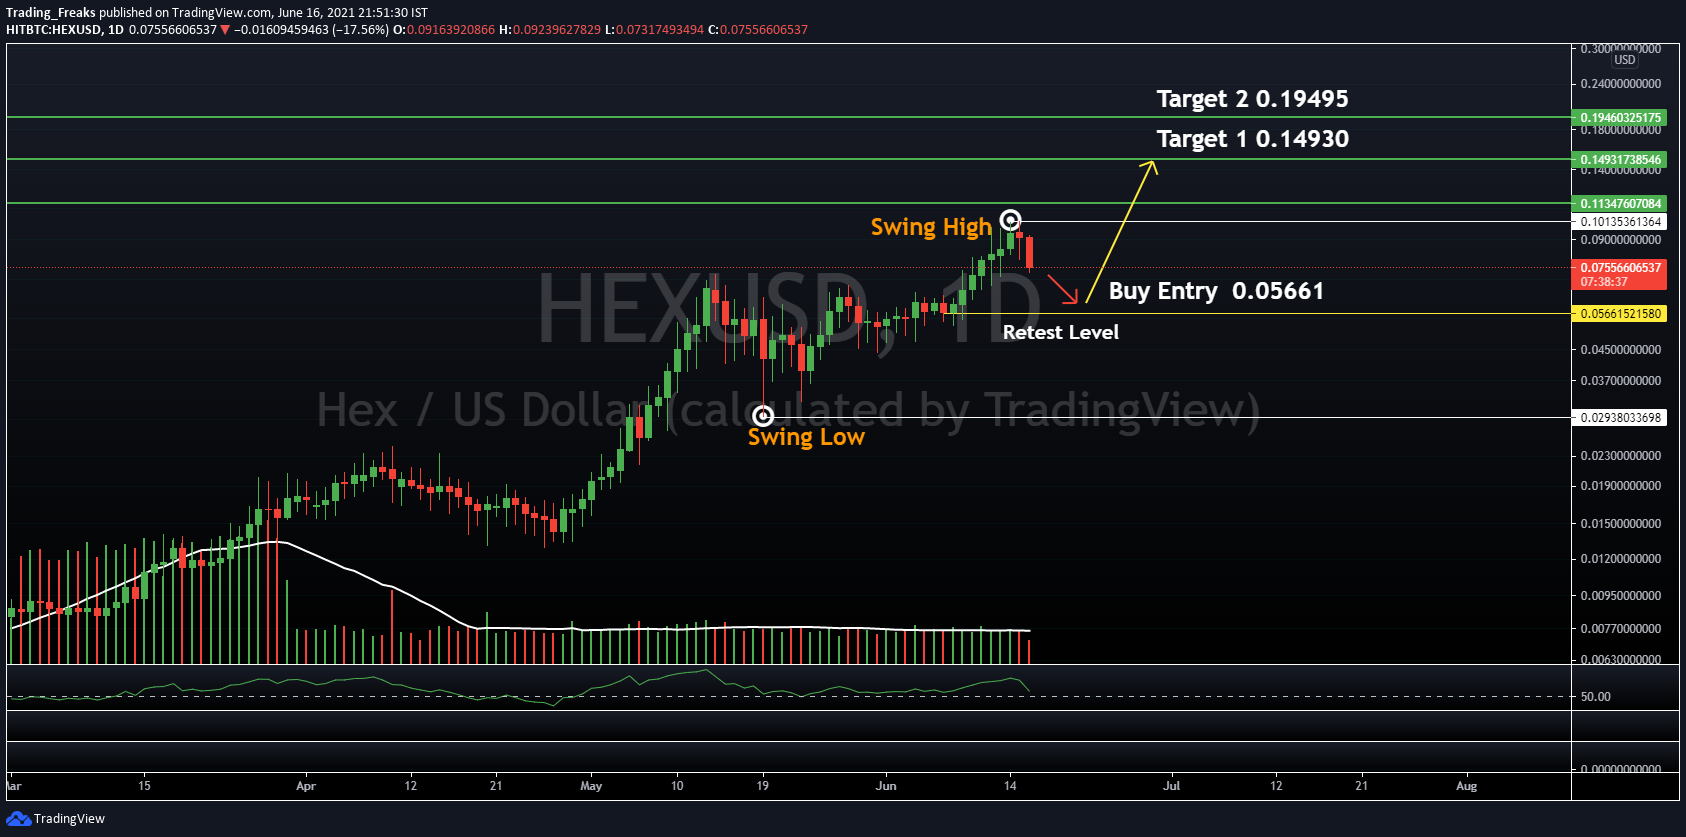 HEX (HEX) Price, Chart & News | Crypto prices & trends on MEXC